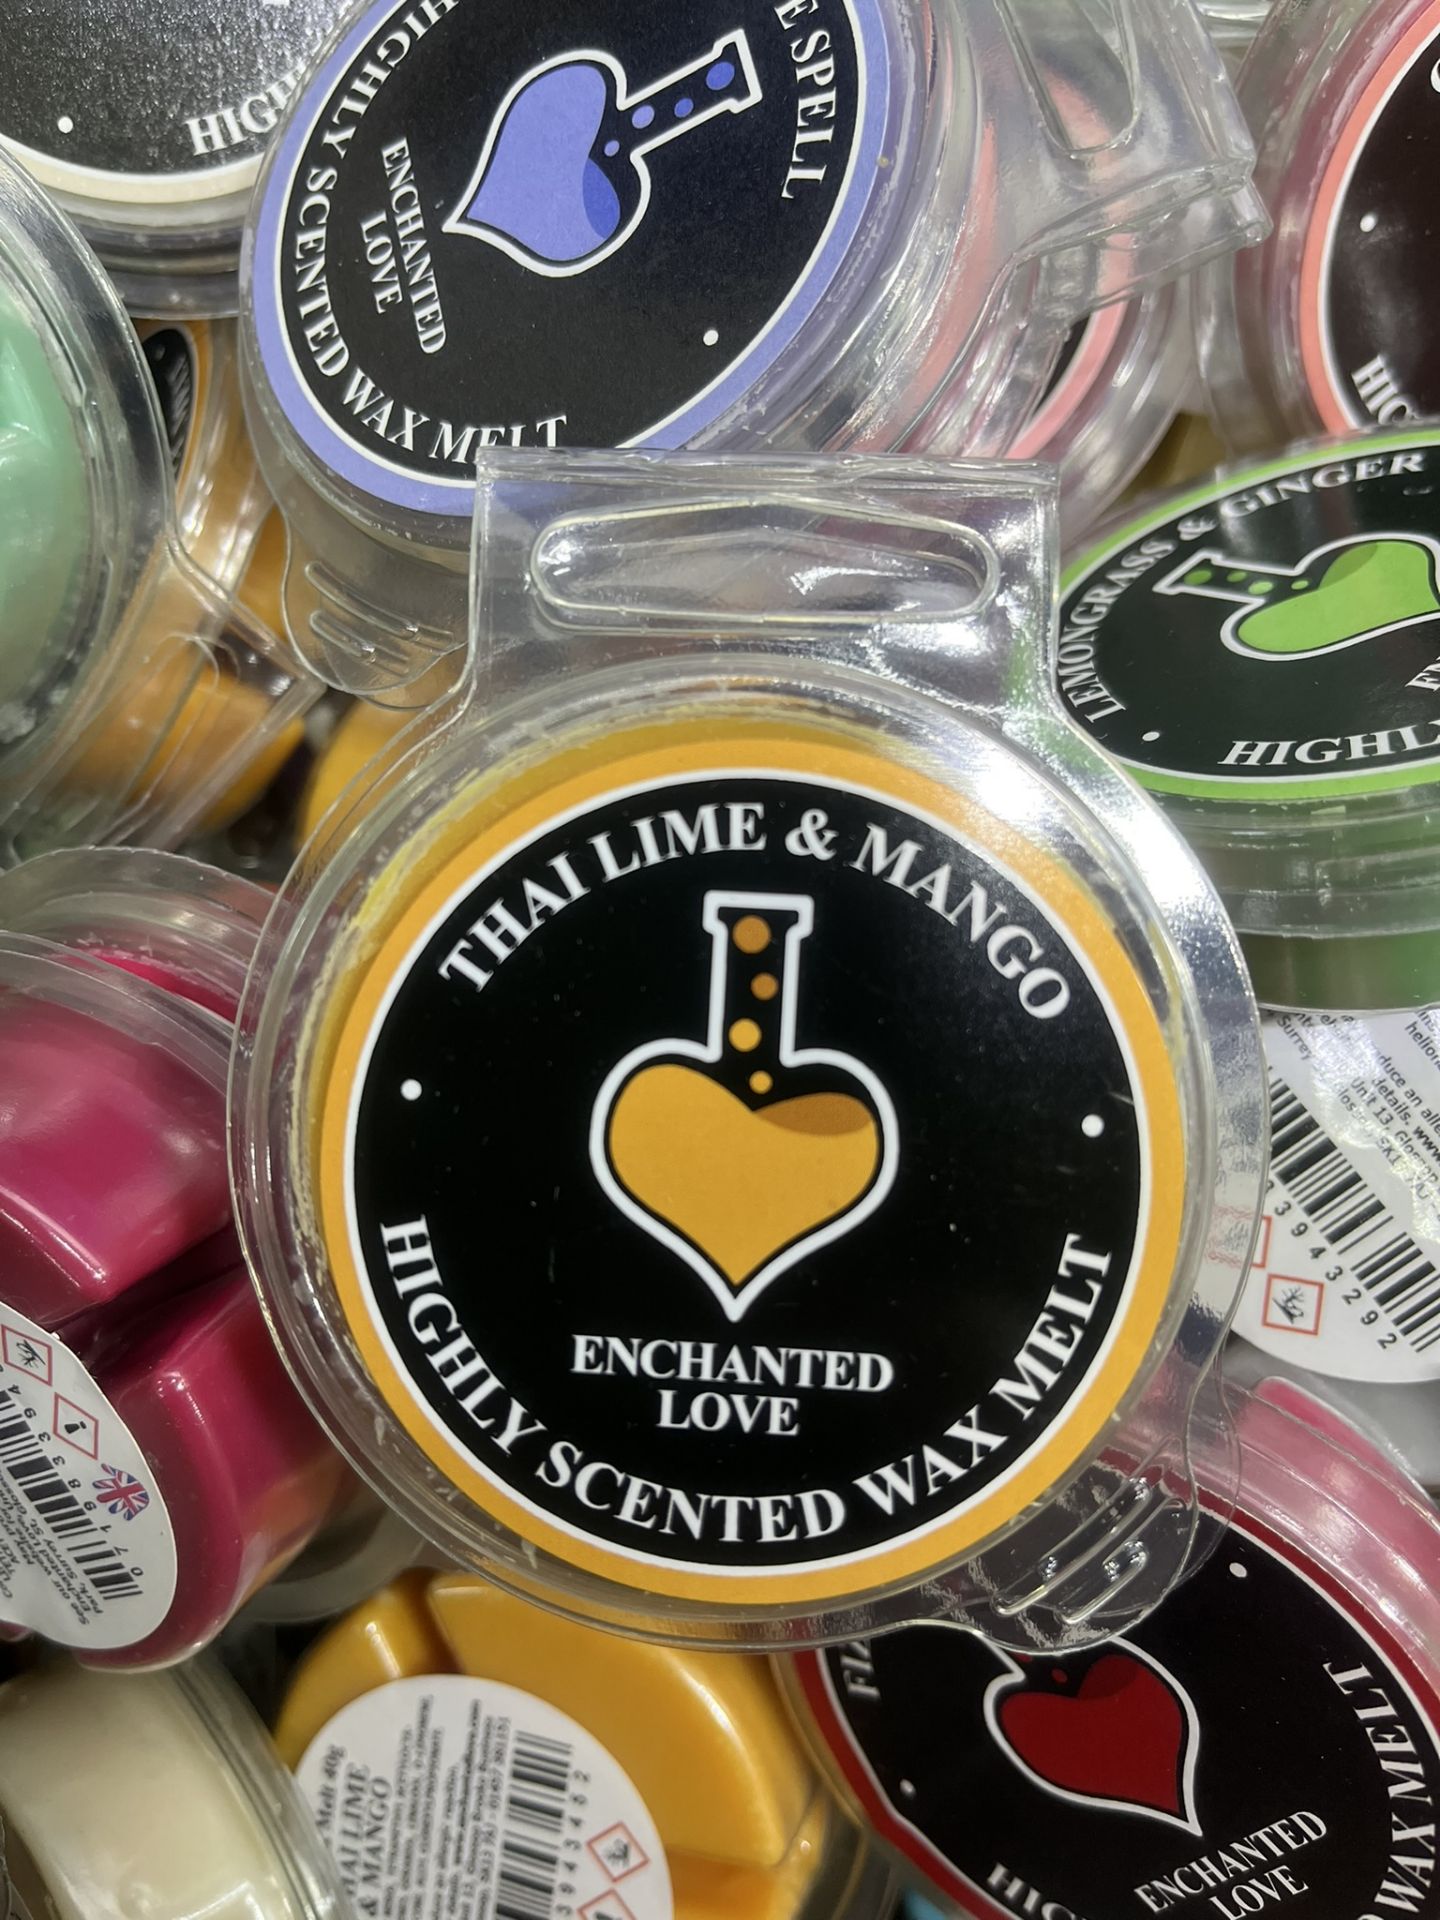 Approx 150 x Packs Of Enchanted Love Highly Scented Wax Melts - Image 2 of 5